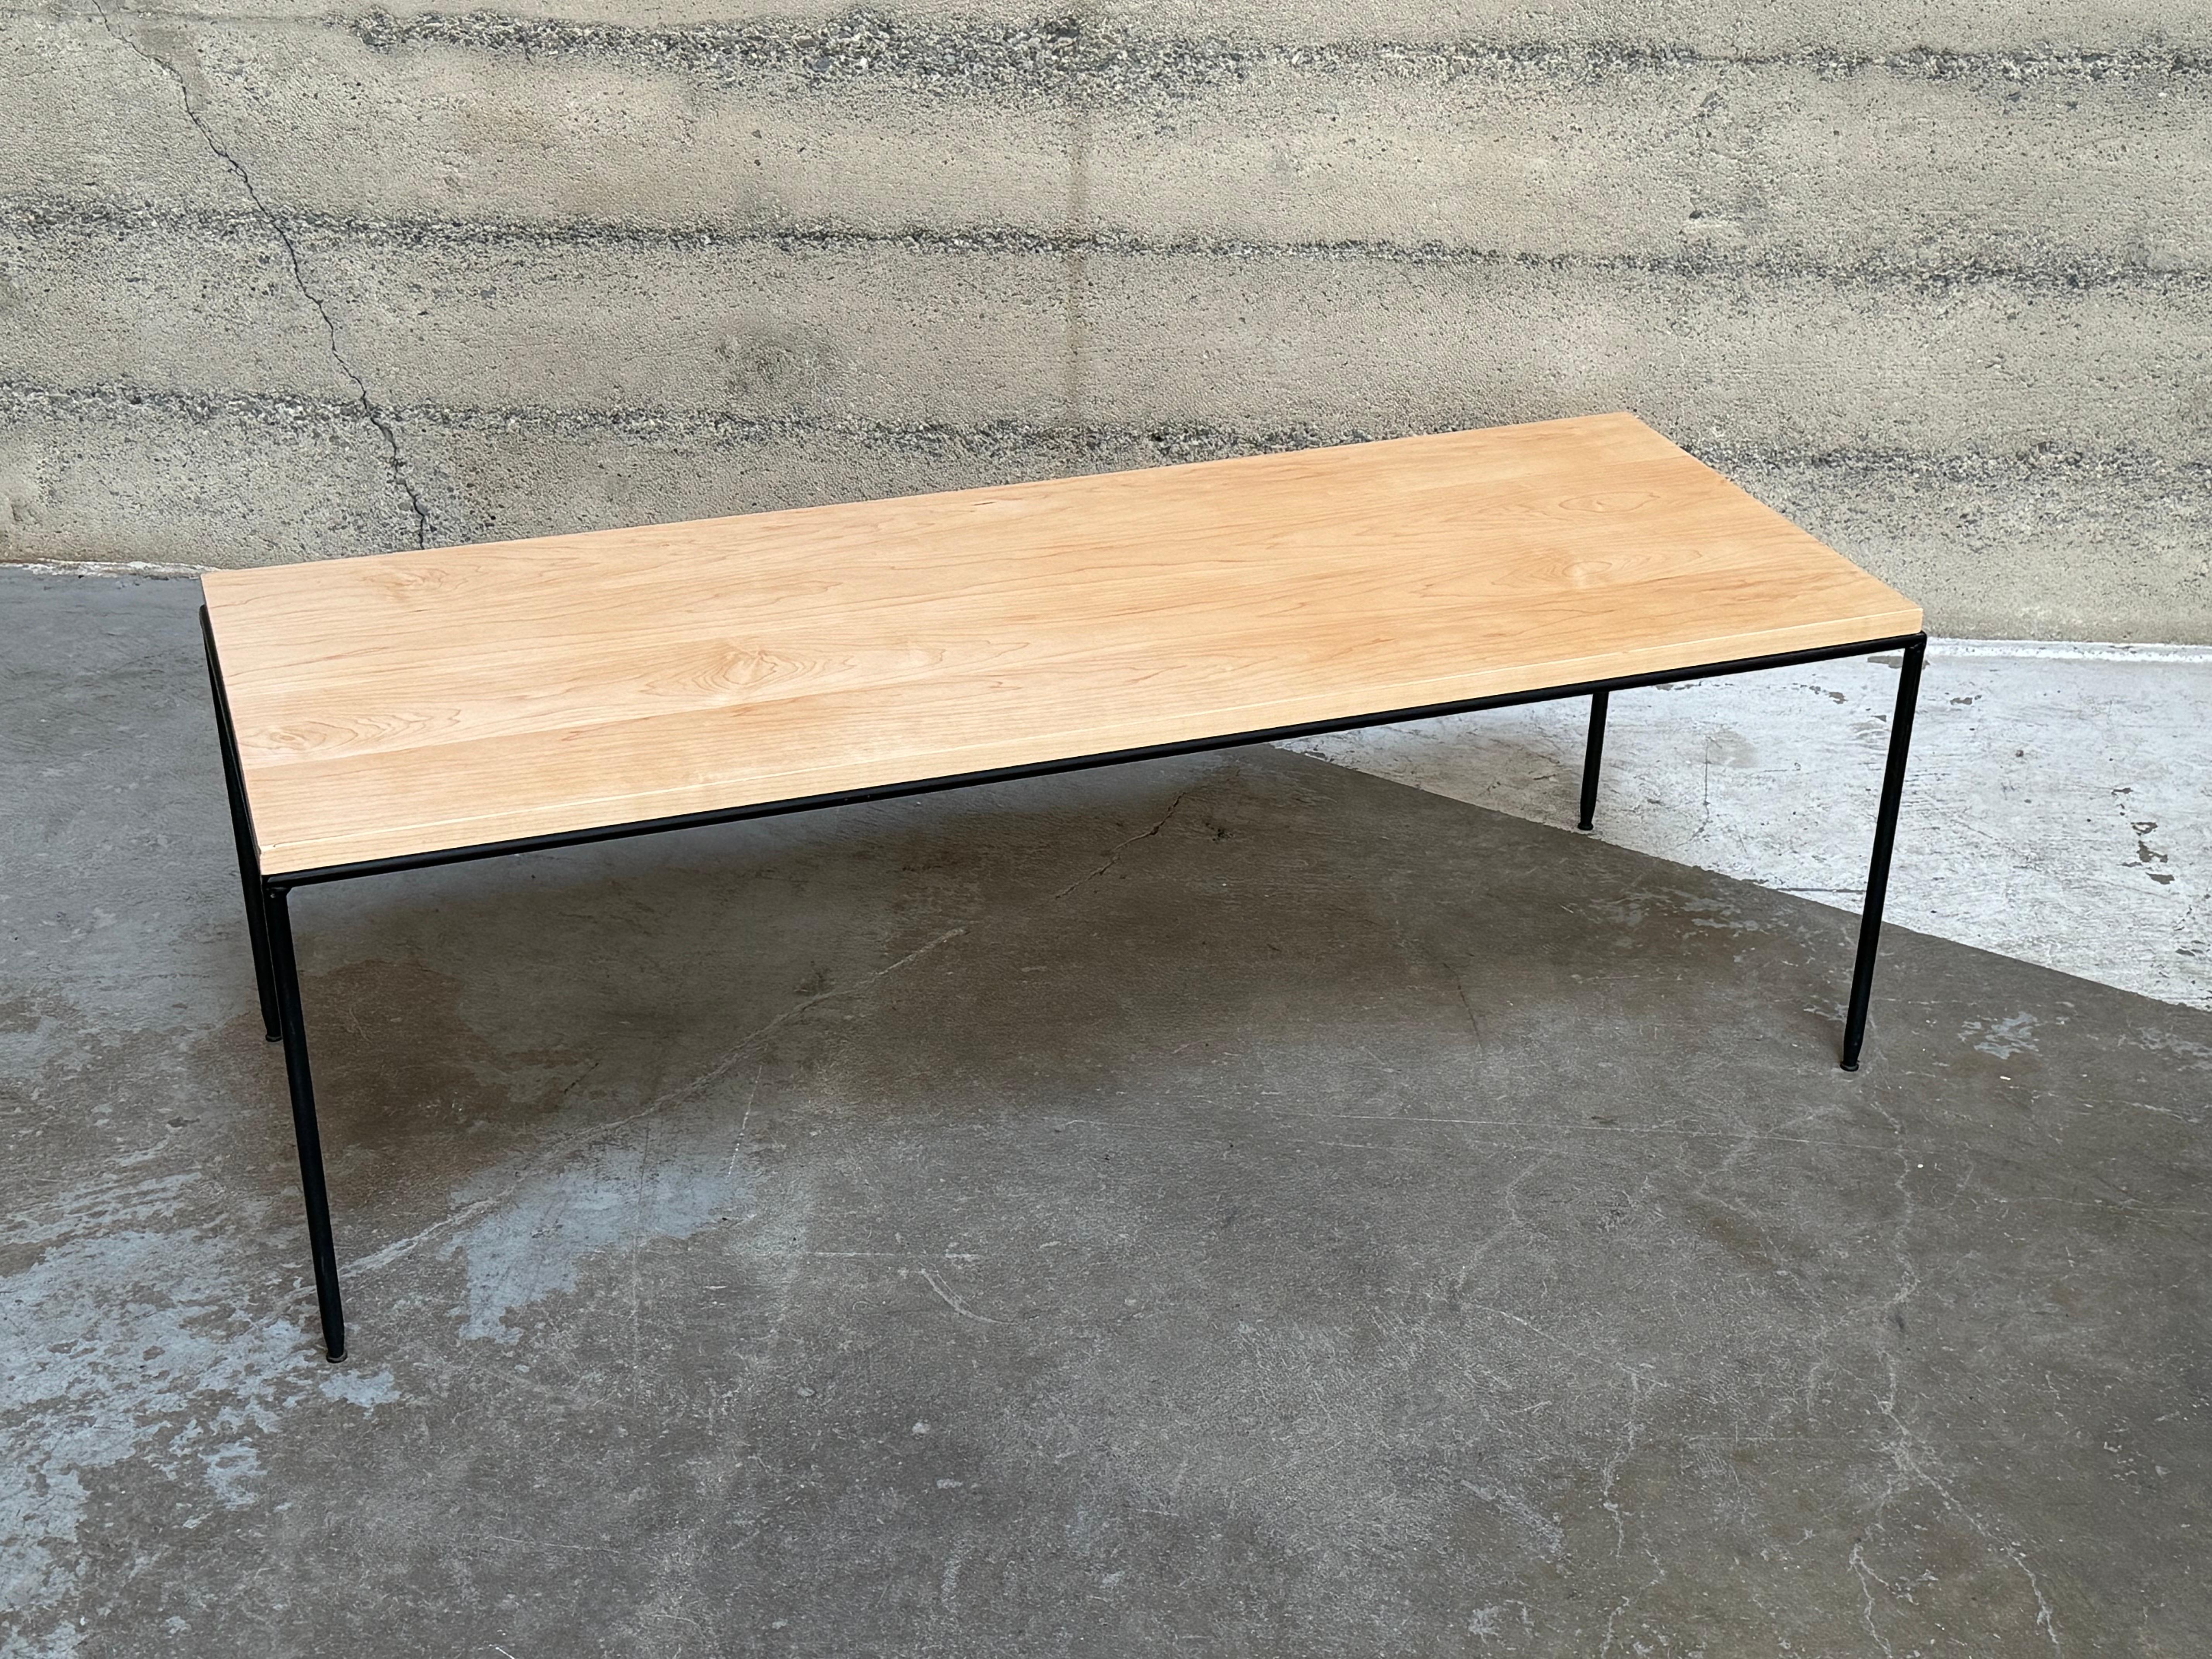 Planner Group coffee table in maple and welded iron with adjustable glides on the bottom of the legs. Designed by Paul McCobb who over the course of his career was bestowed the Good Design Award by the MoMA NY for his creations.